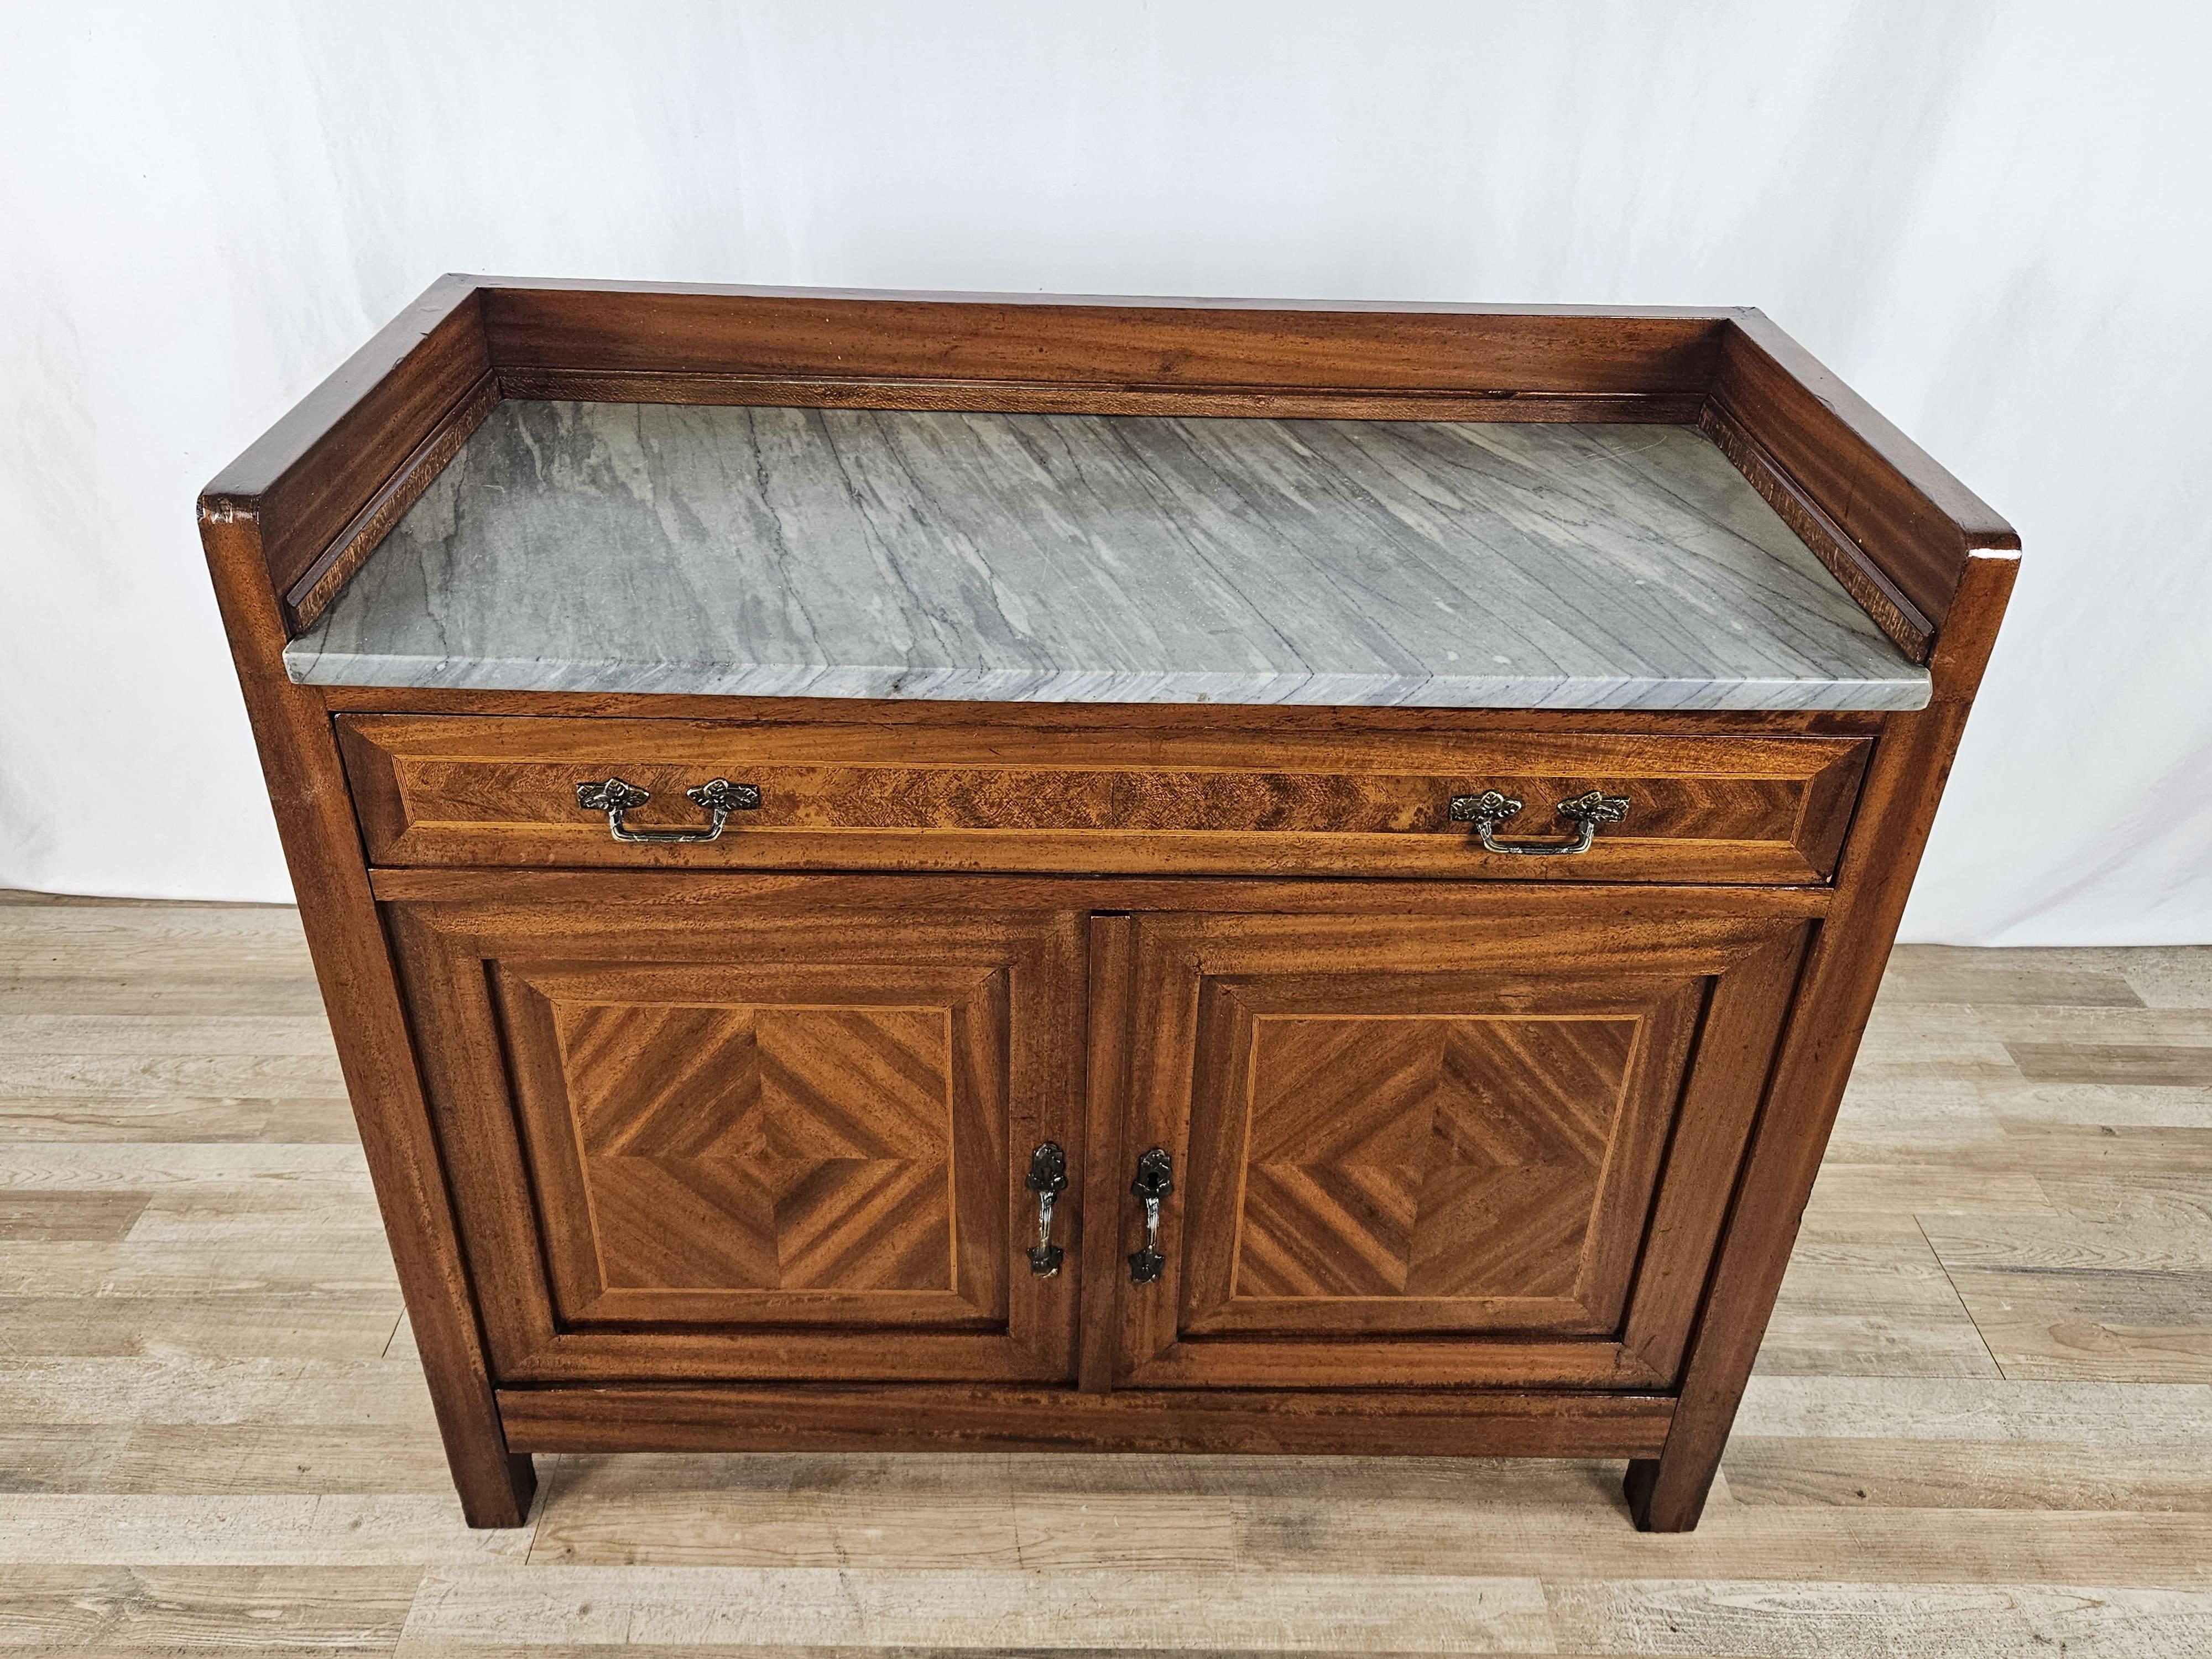 Elegant Art Nouveau-style dressing table from 1910/20, Italian made in walnut with ornate details and brass floral handles.

A multipurpose cabinet, it can be used in an entryway as an emptying cupboard or in a bedroom as a dressing table or